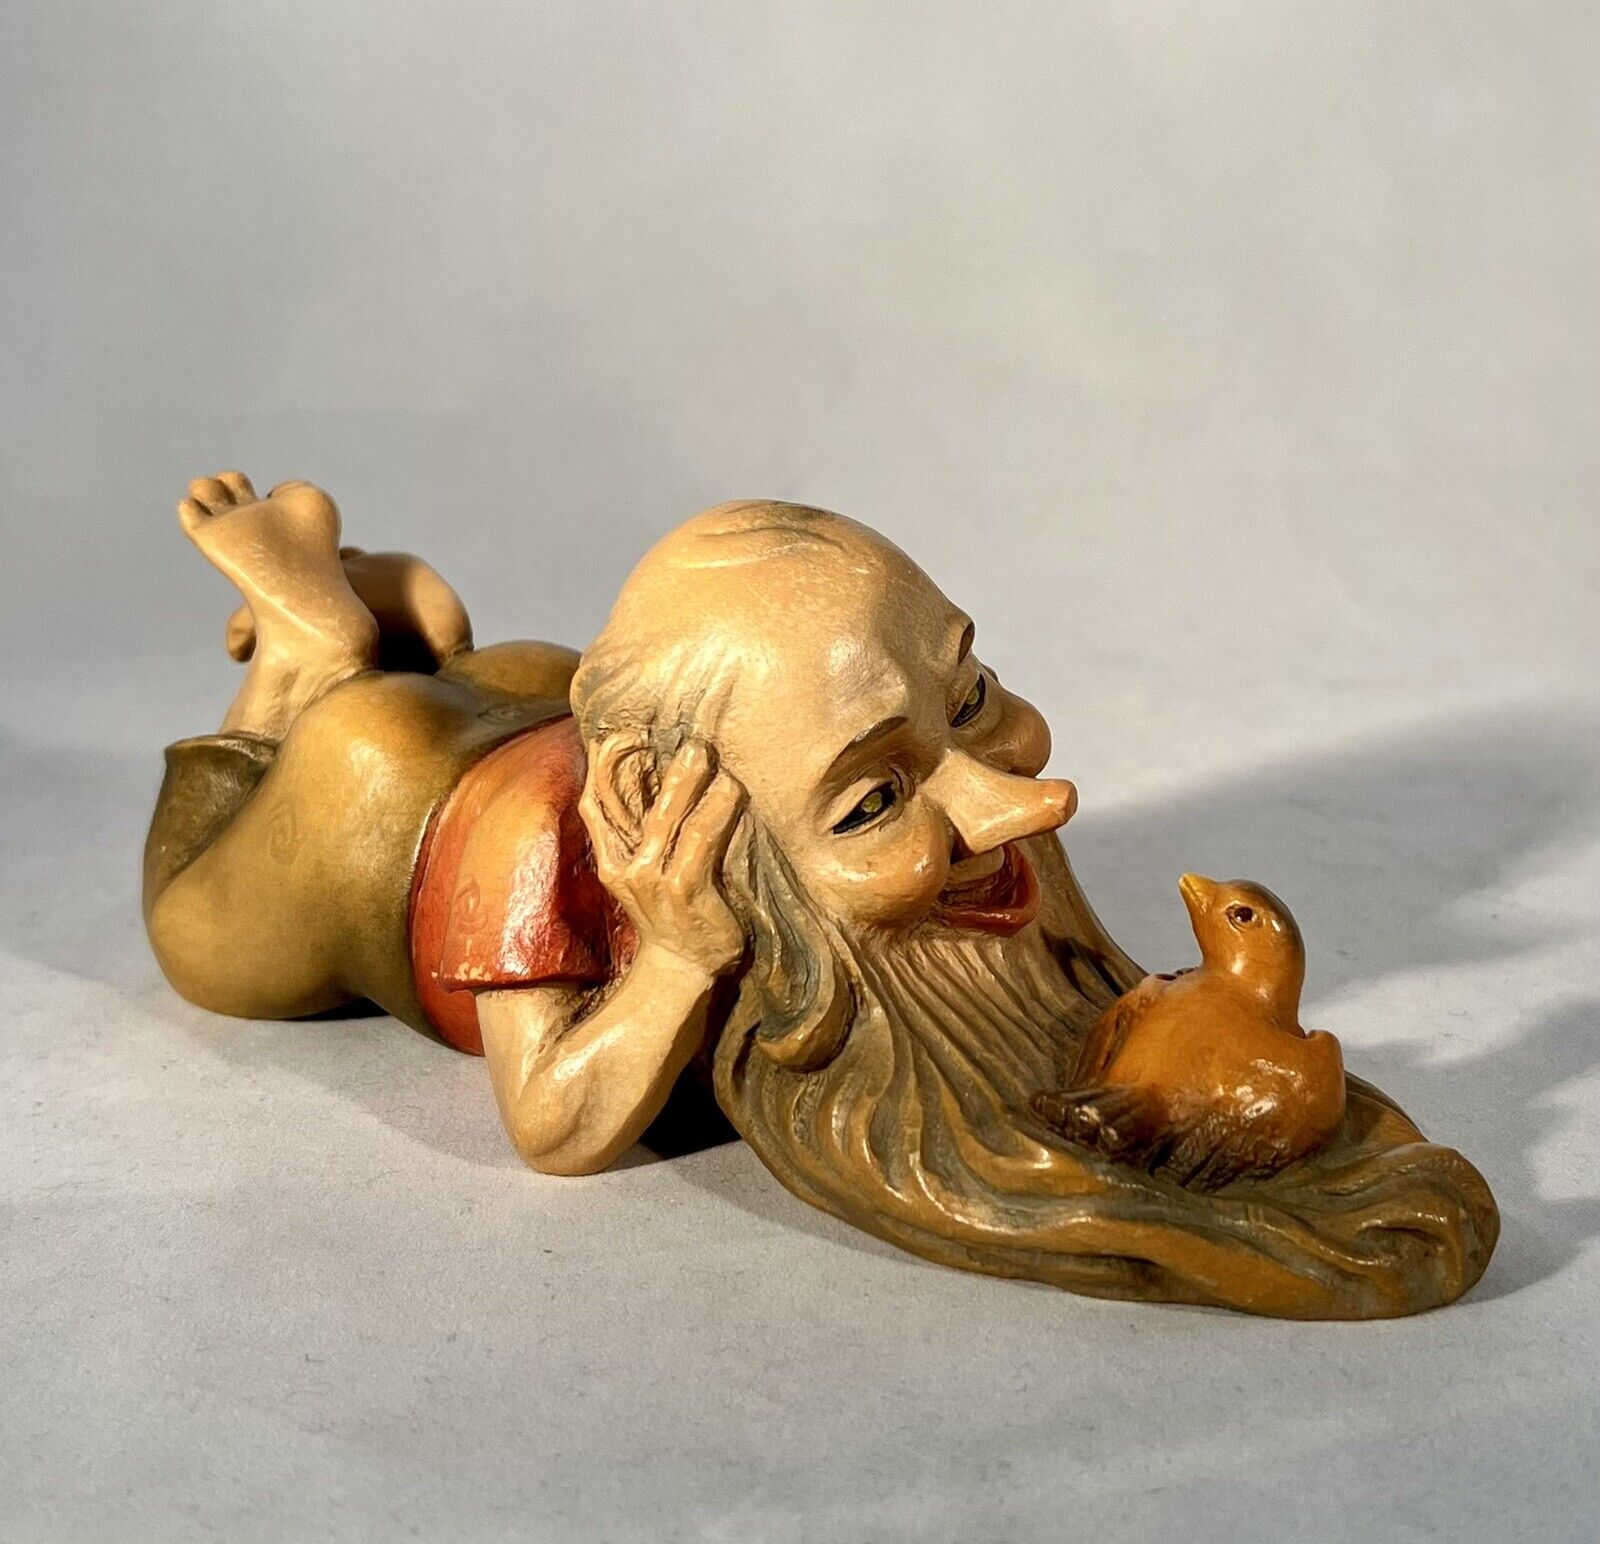 Anri Hand Carved The Meditator The Little Folks of the Salvans Italy 8” Troll